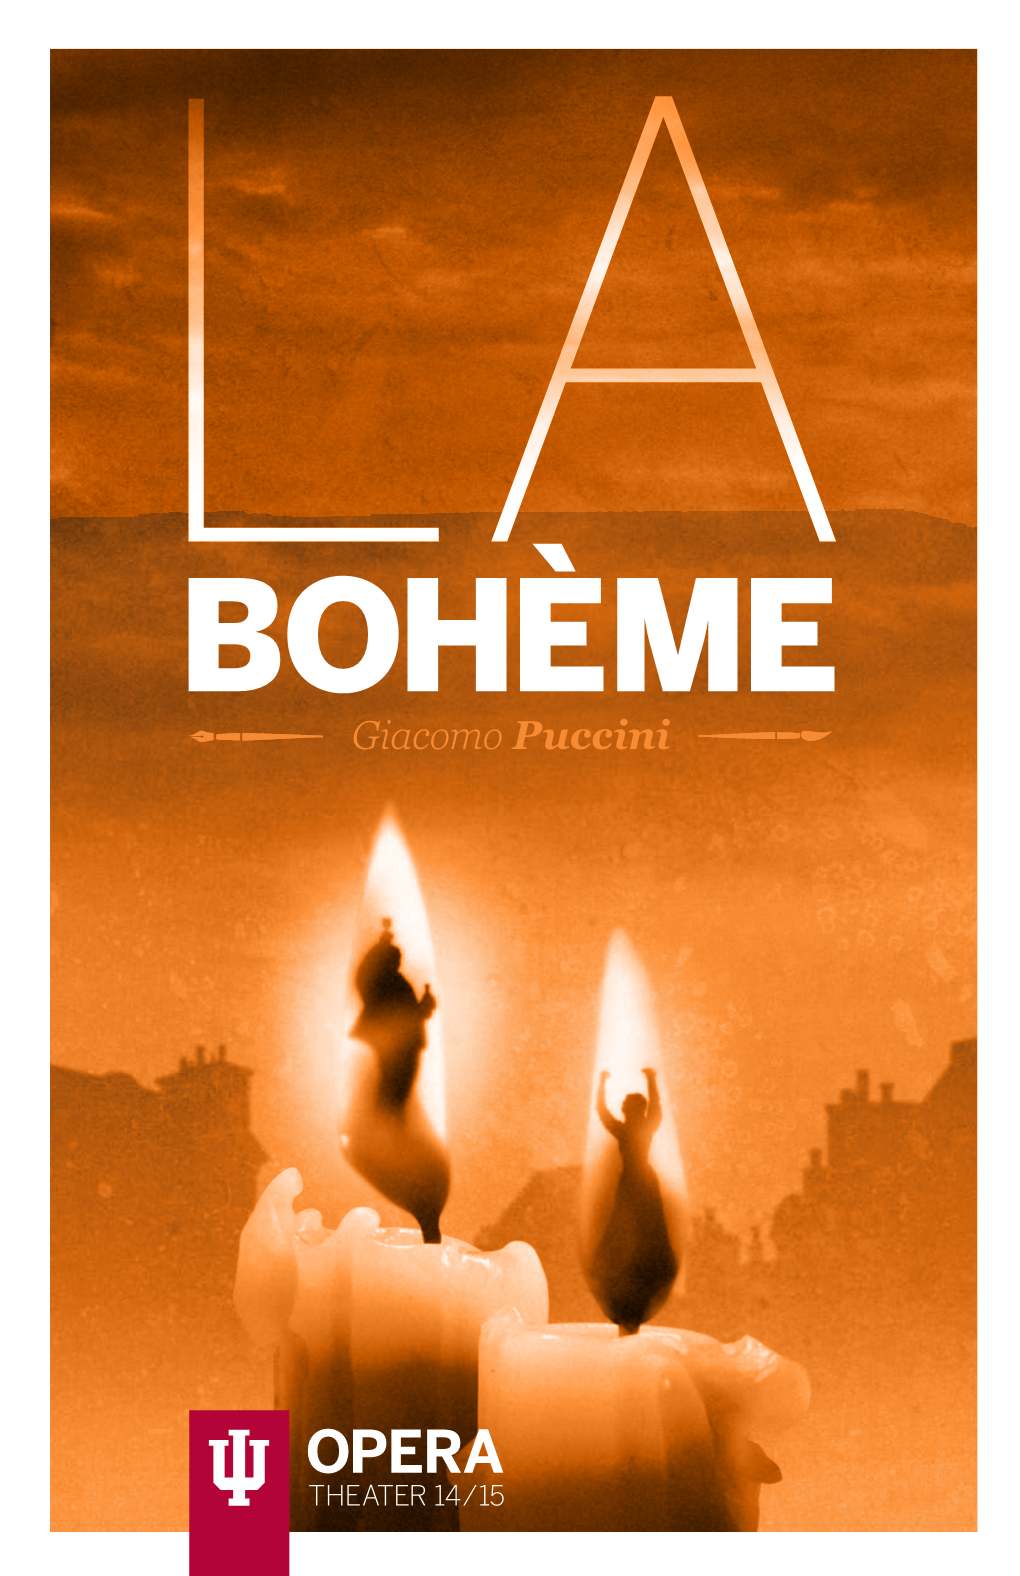 BOHÈME Giacomo Puccini One Hundred Fifty-Second Program of the 2013-14 Season ______Indiana University Opera Theater Presents